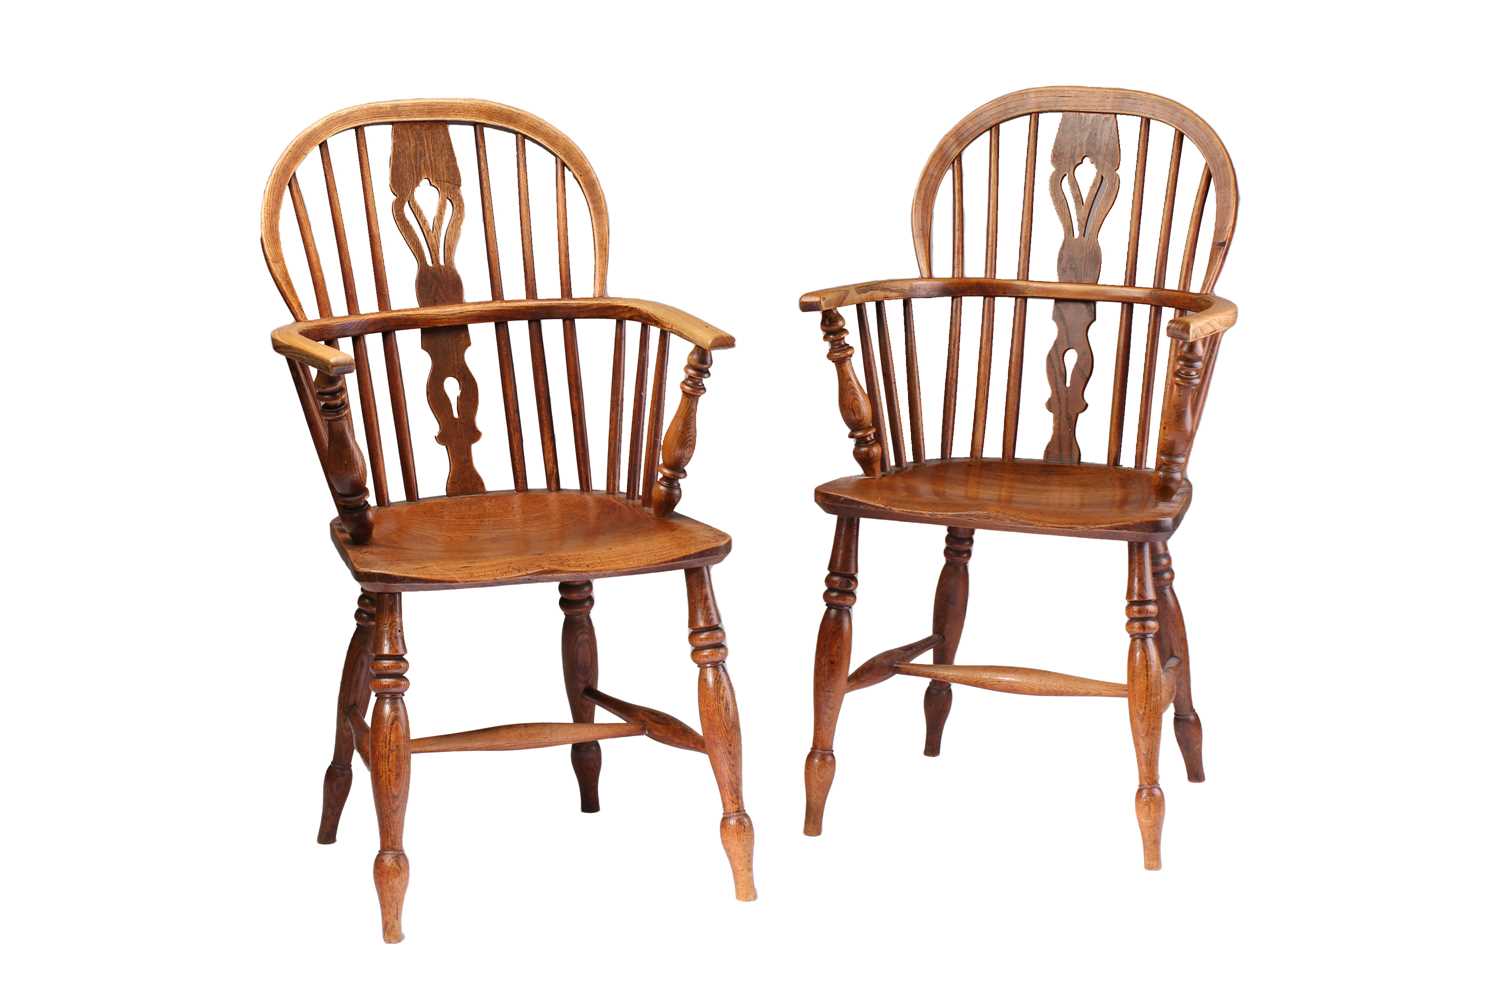 A close pair of 19th-century elm and ash hoop backed Windsor open armchairs with pierced "